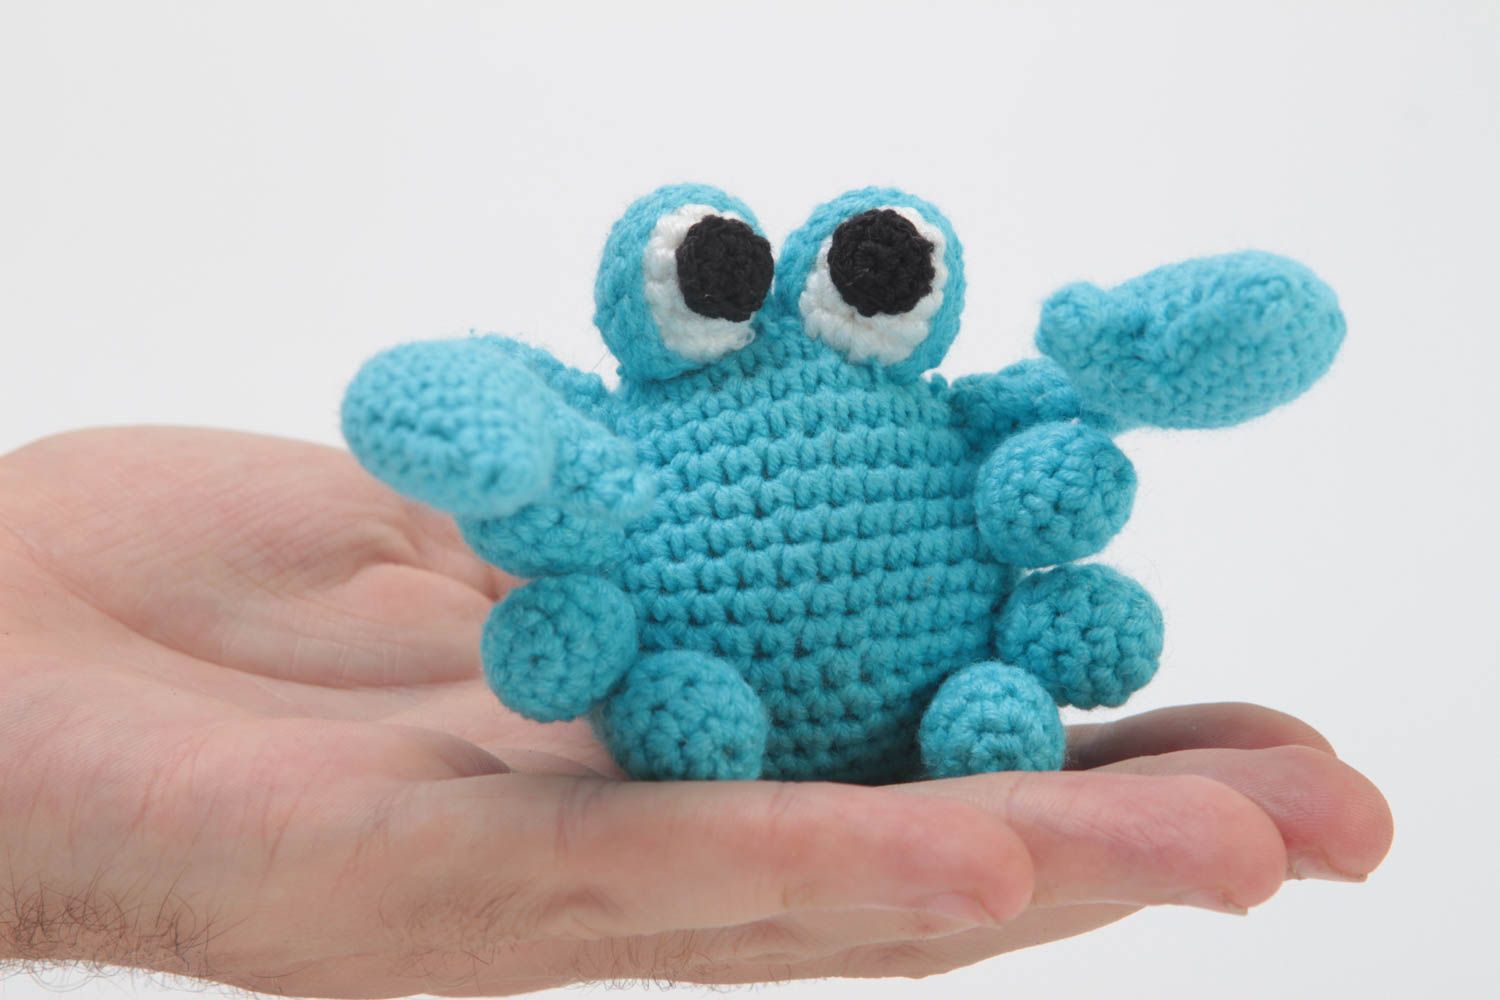 Cute handmade crochet toy soft toy for kids stuffed toy birthday gift ideas photo 5